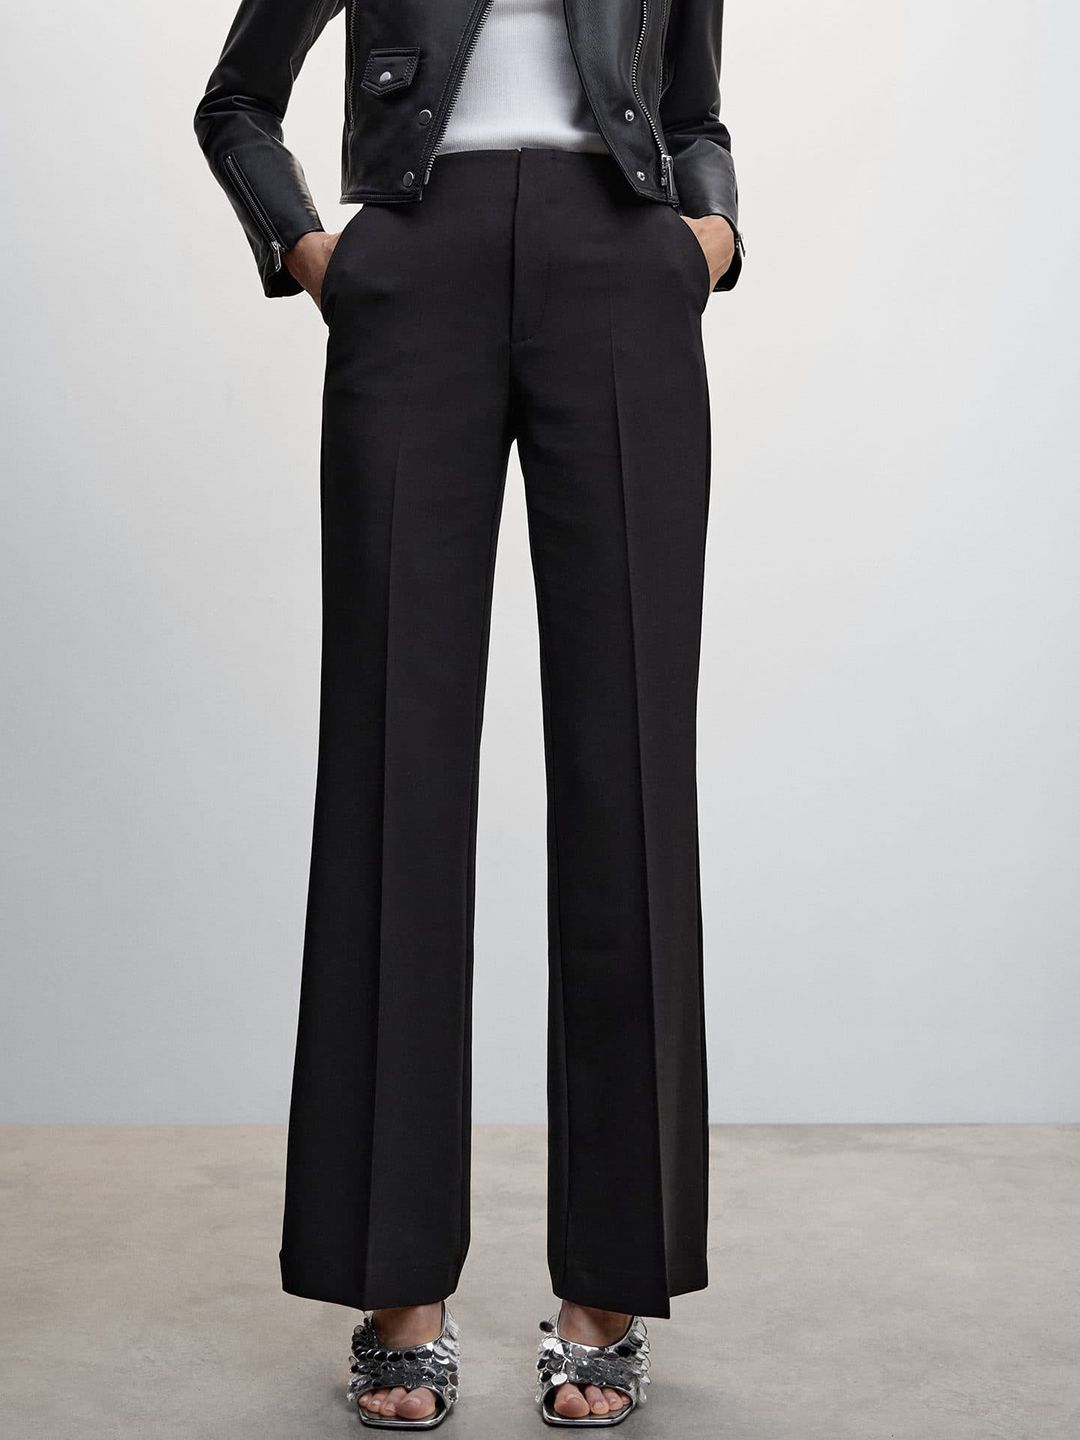 MANGO Women Solid Trousers Price in India